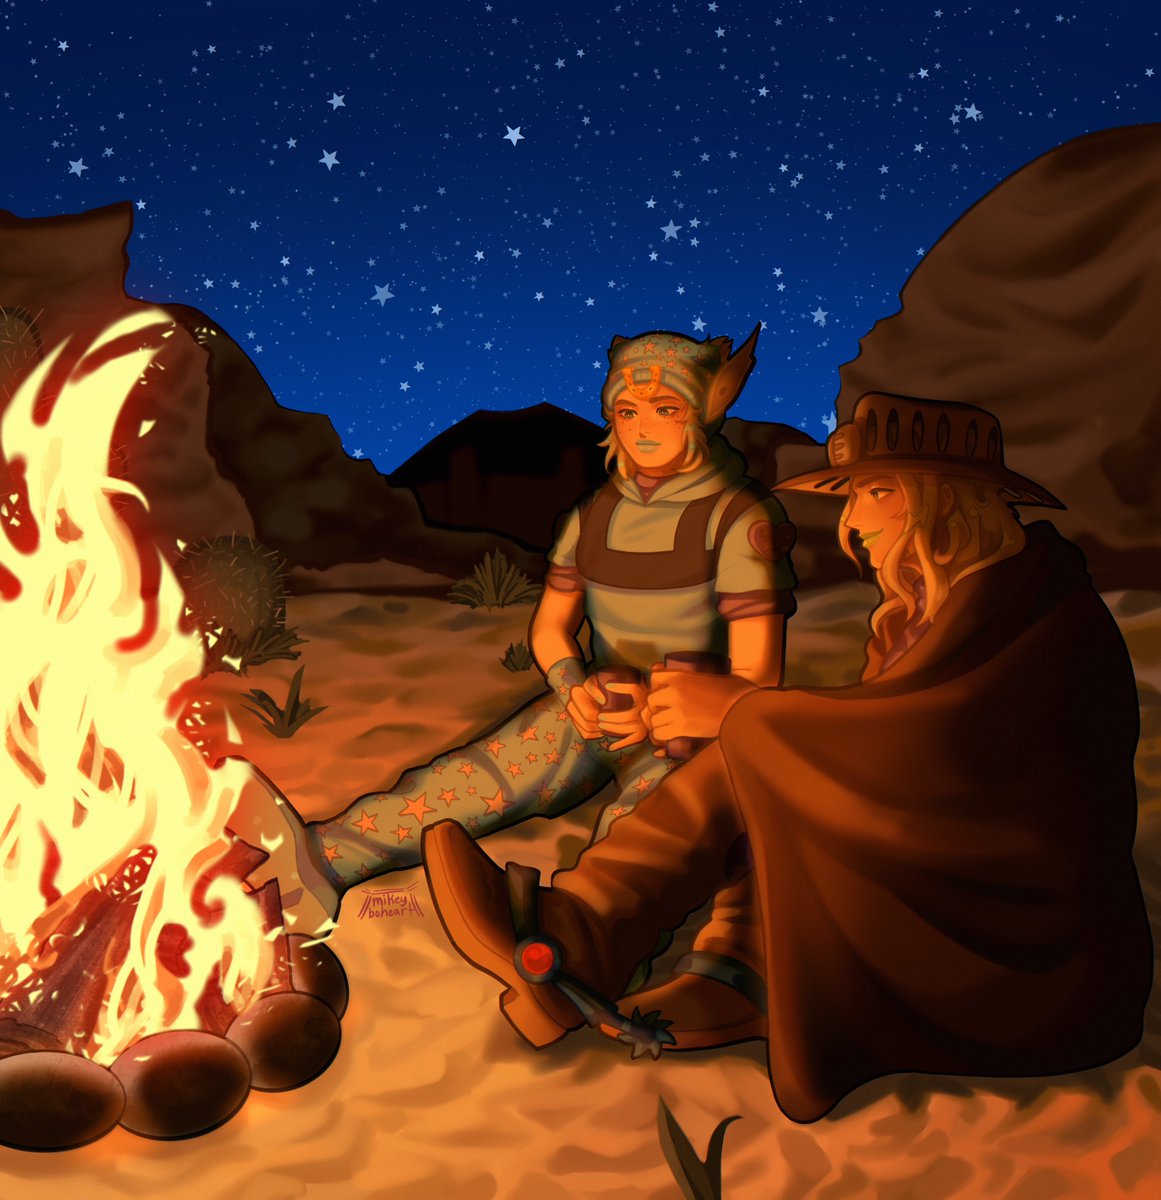 Johnny and Gyro chilling by a fire (Gyjo)